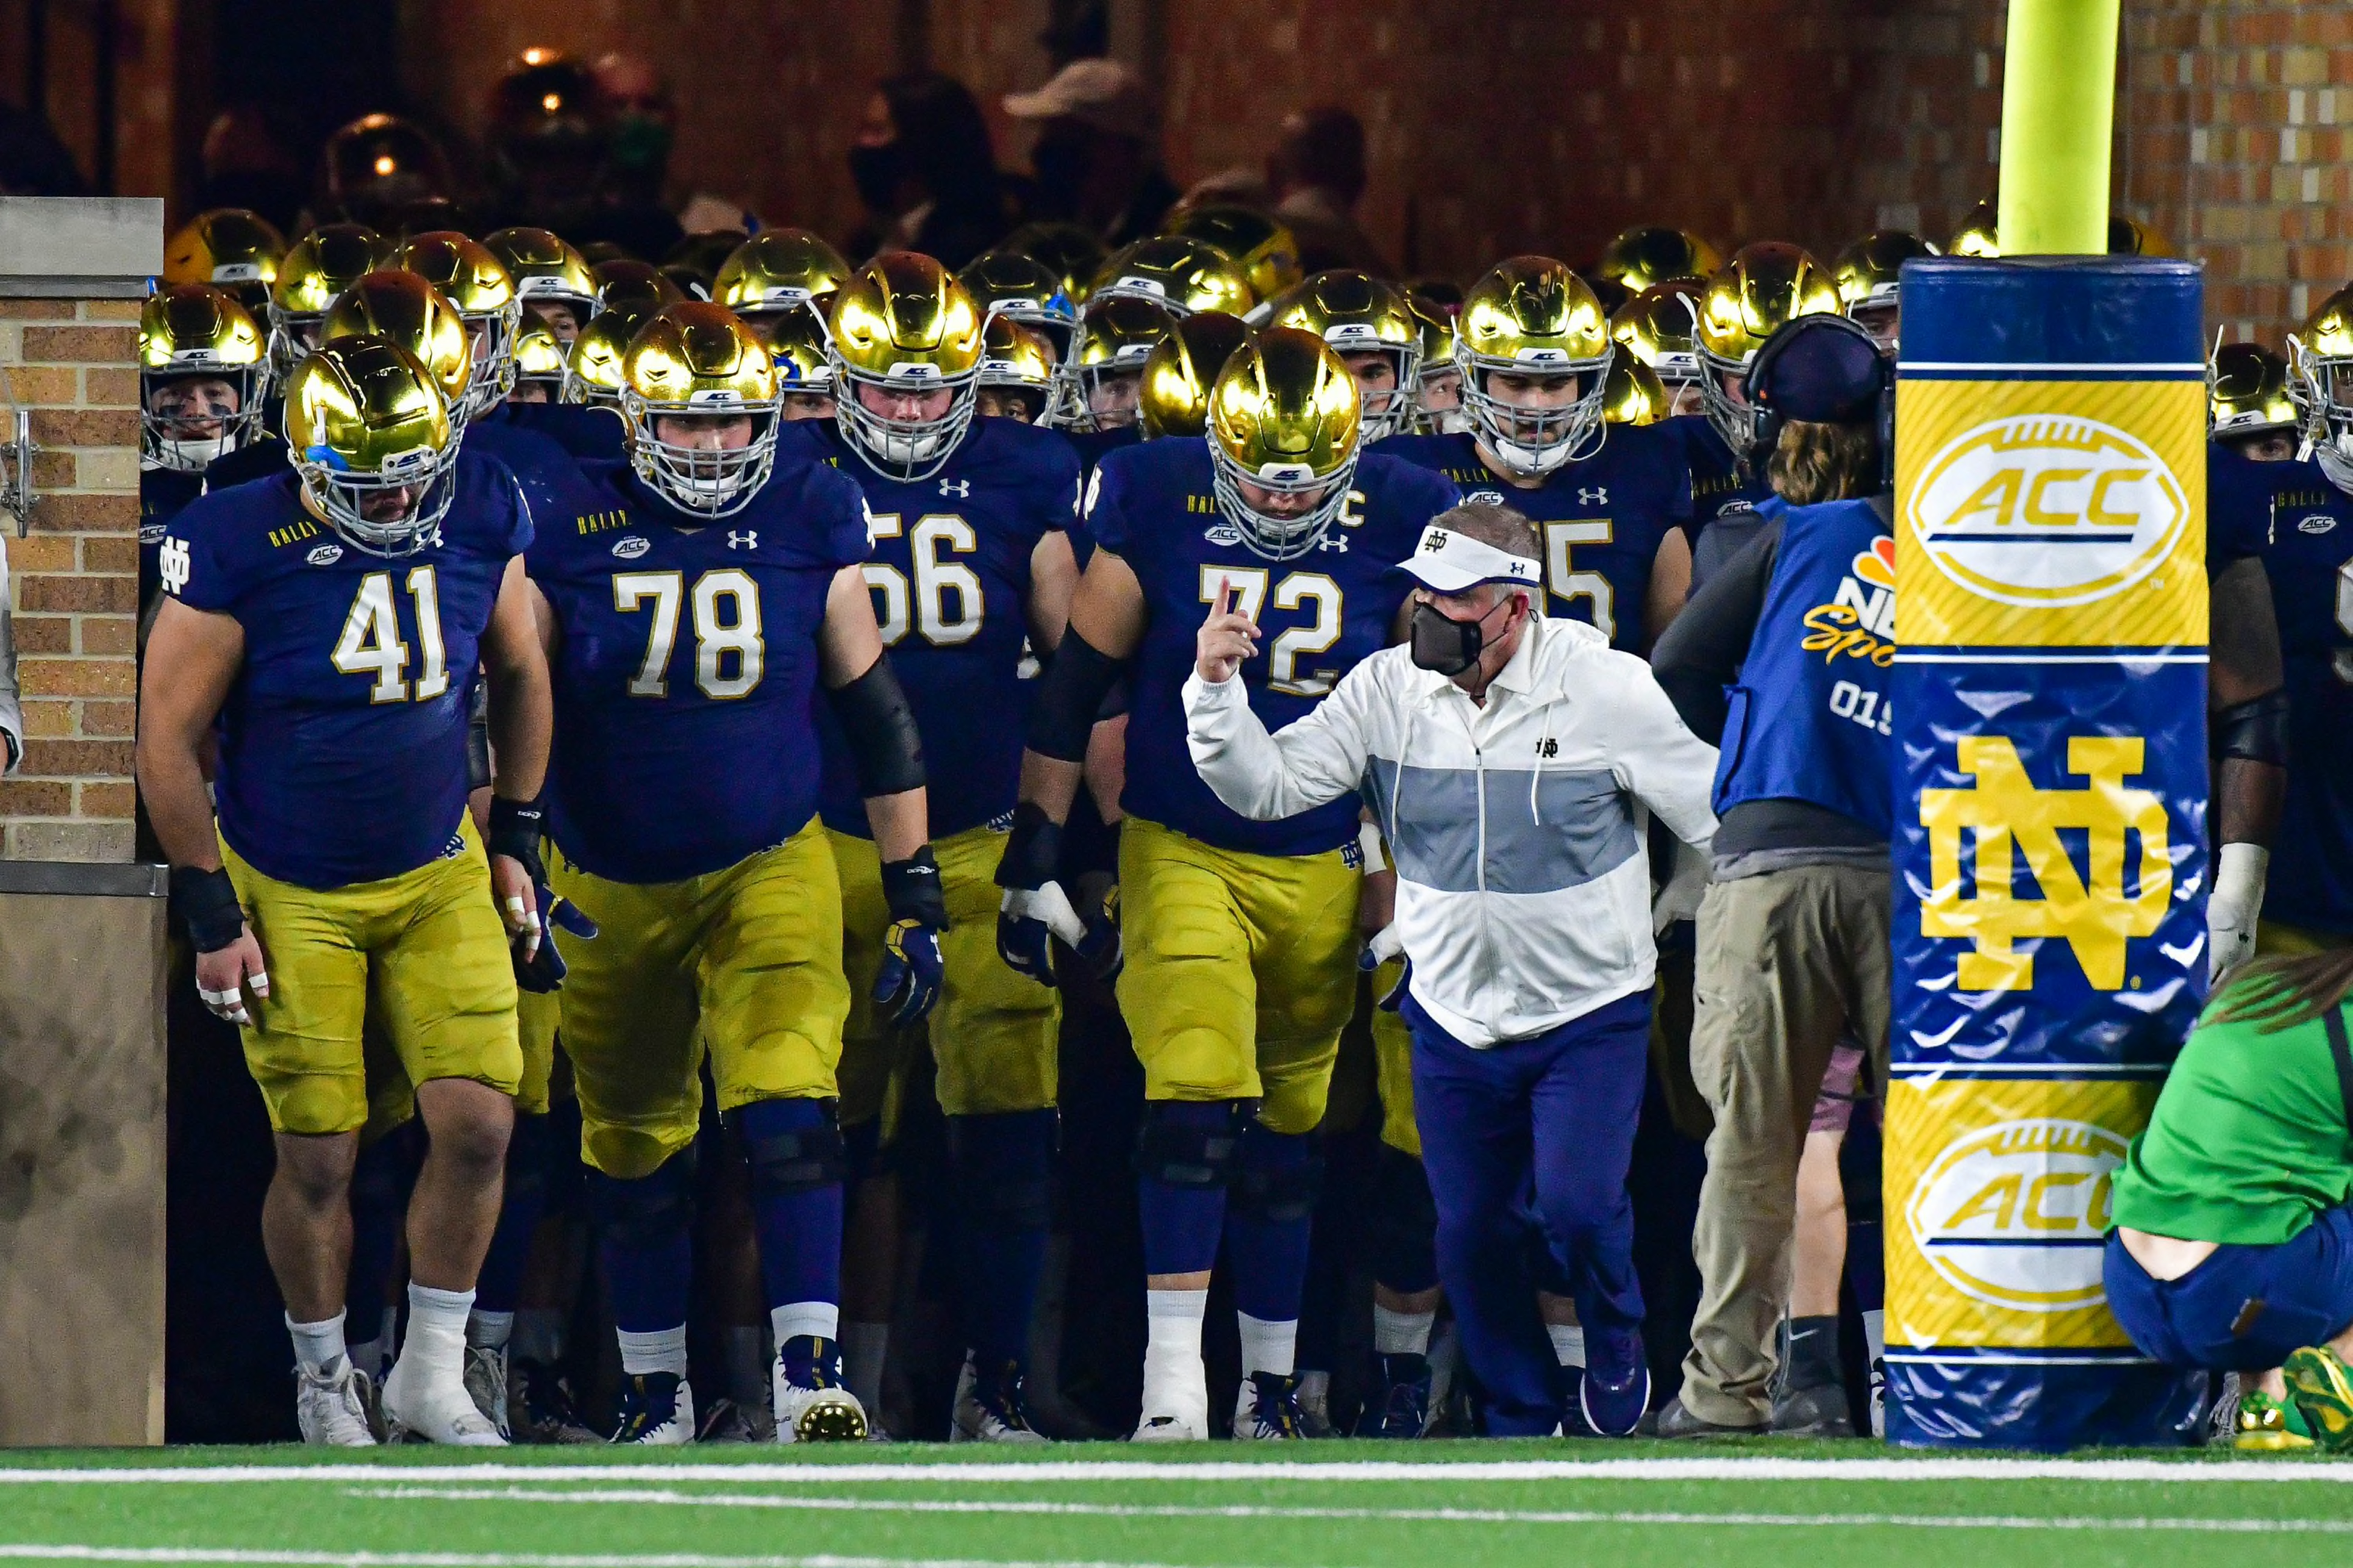 Notre Dame Football: Top-5 offensive players returning in 2021